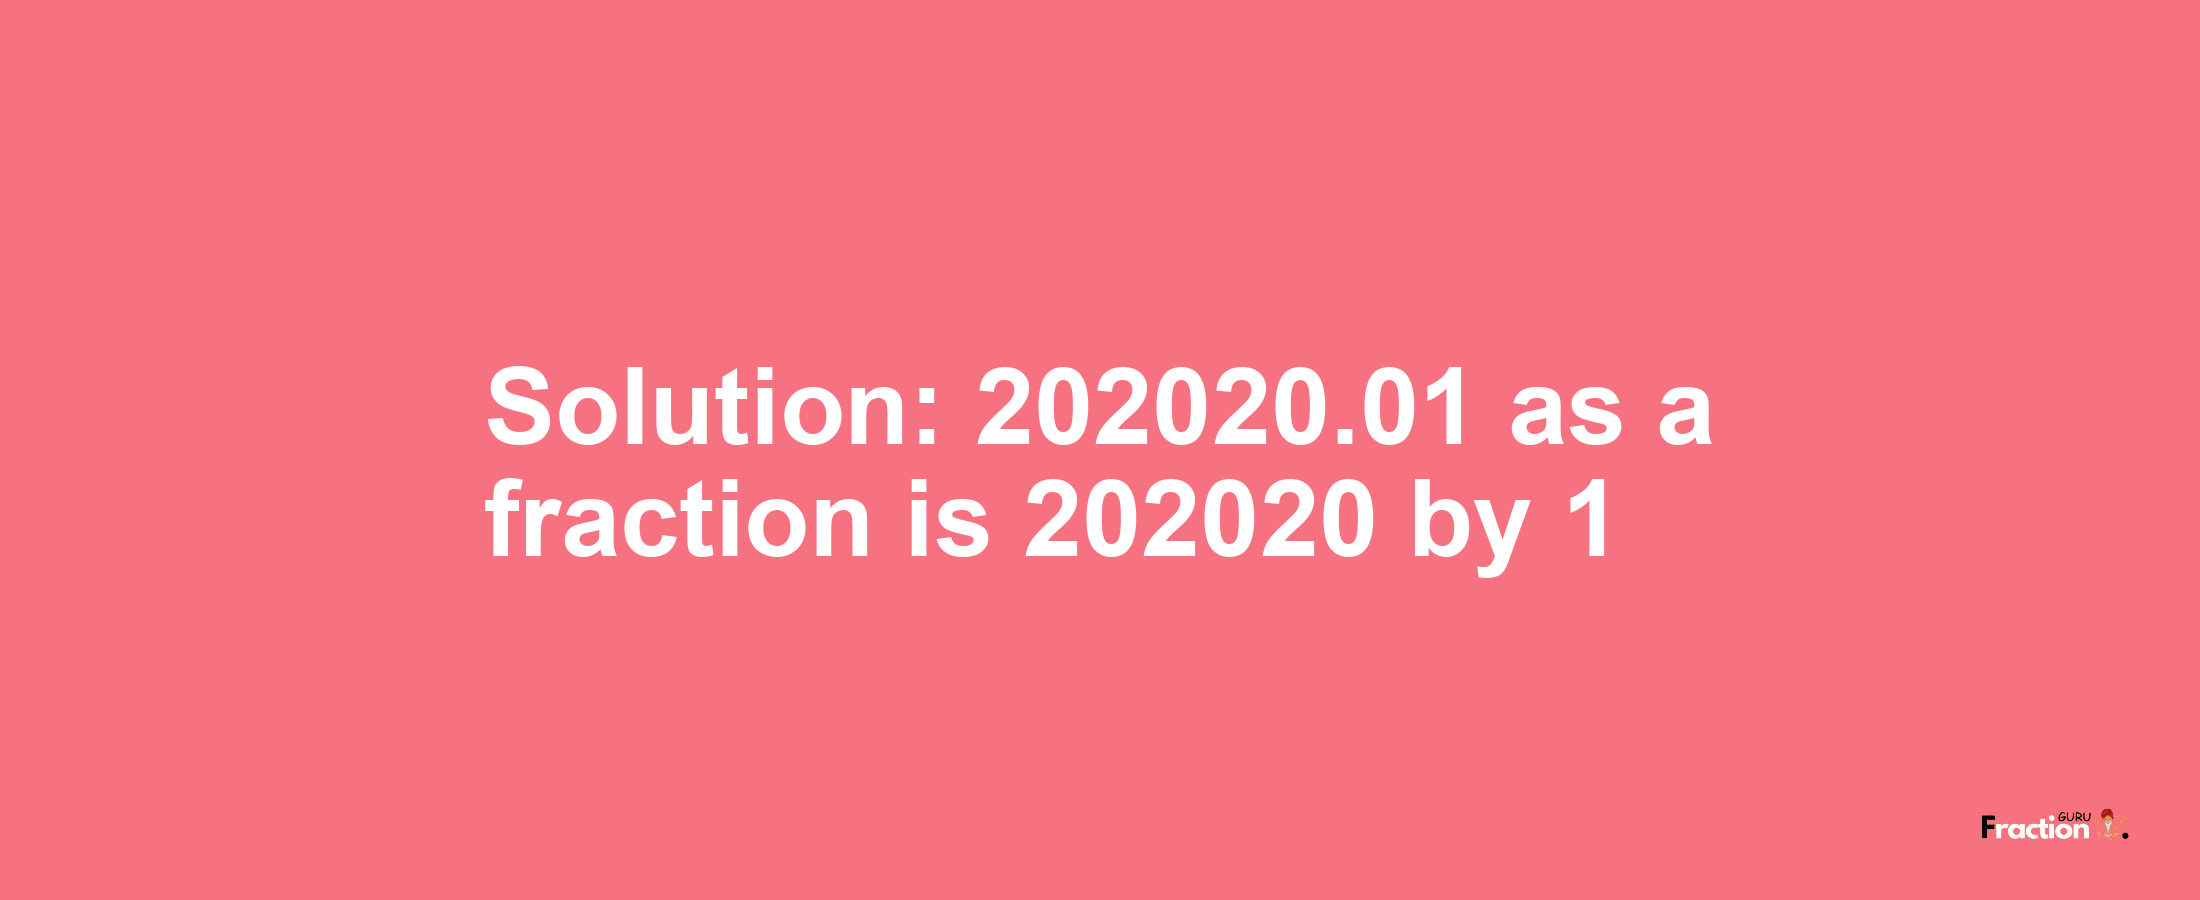 Solution:202020.01 as a fraction is 202020/1